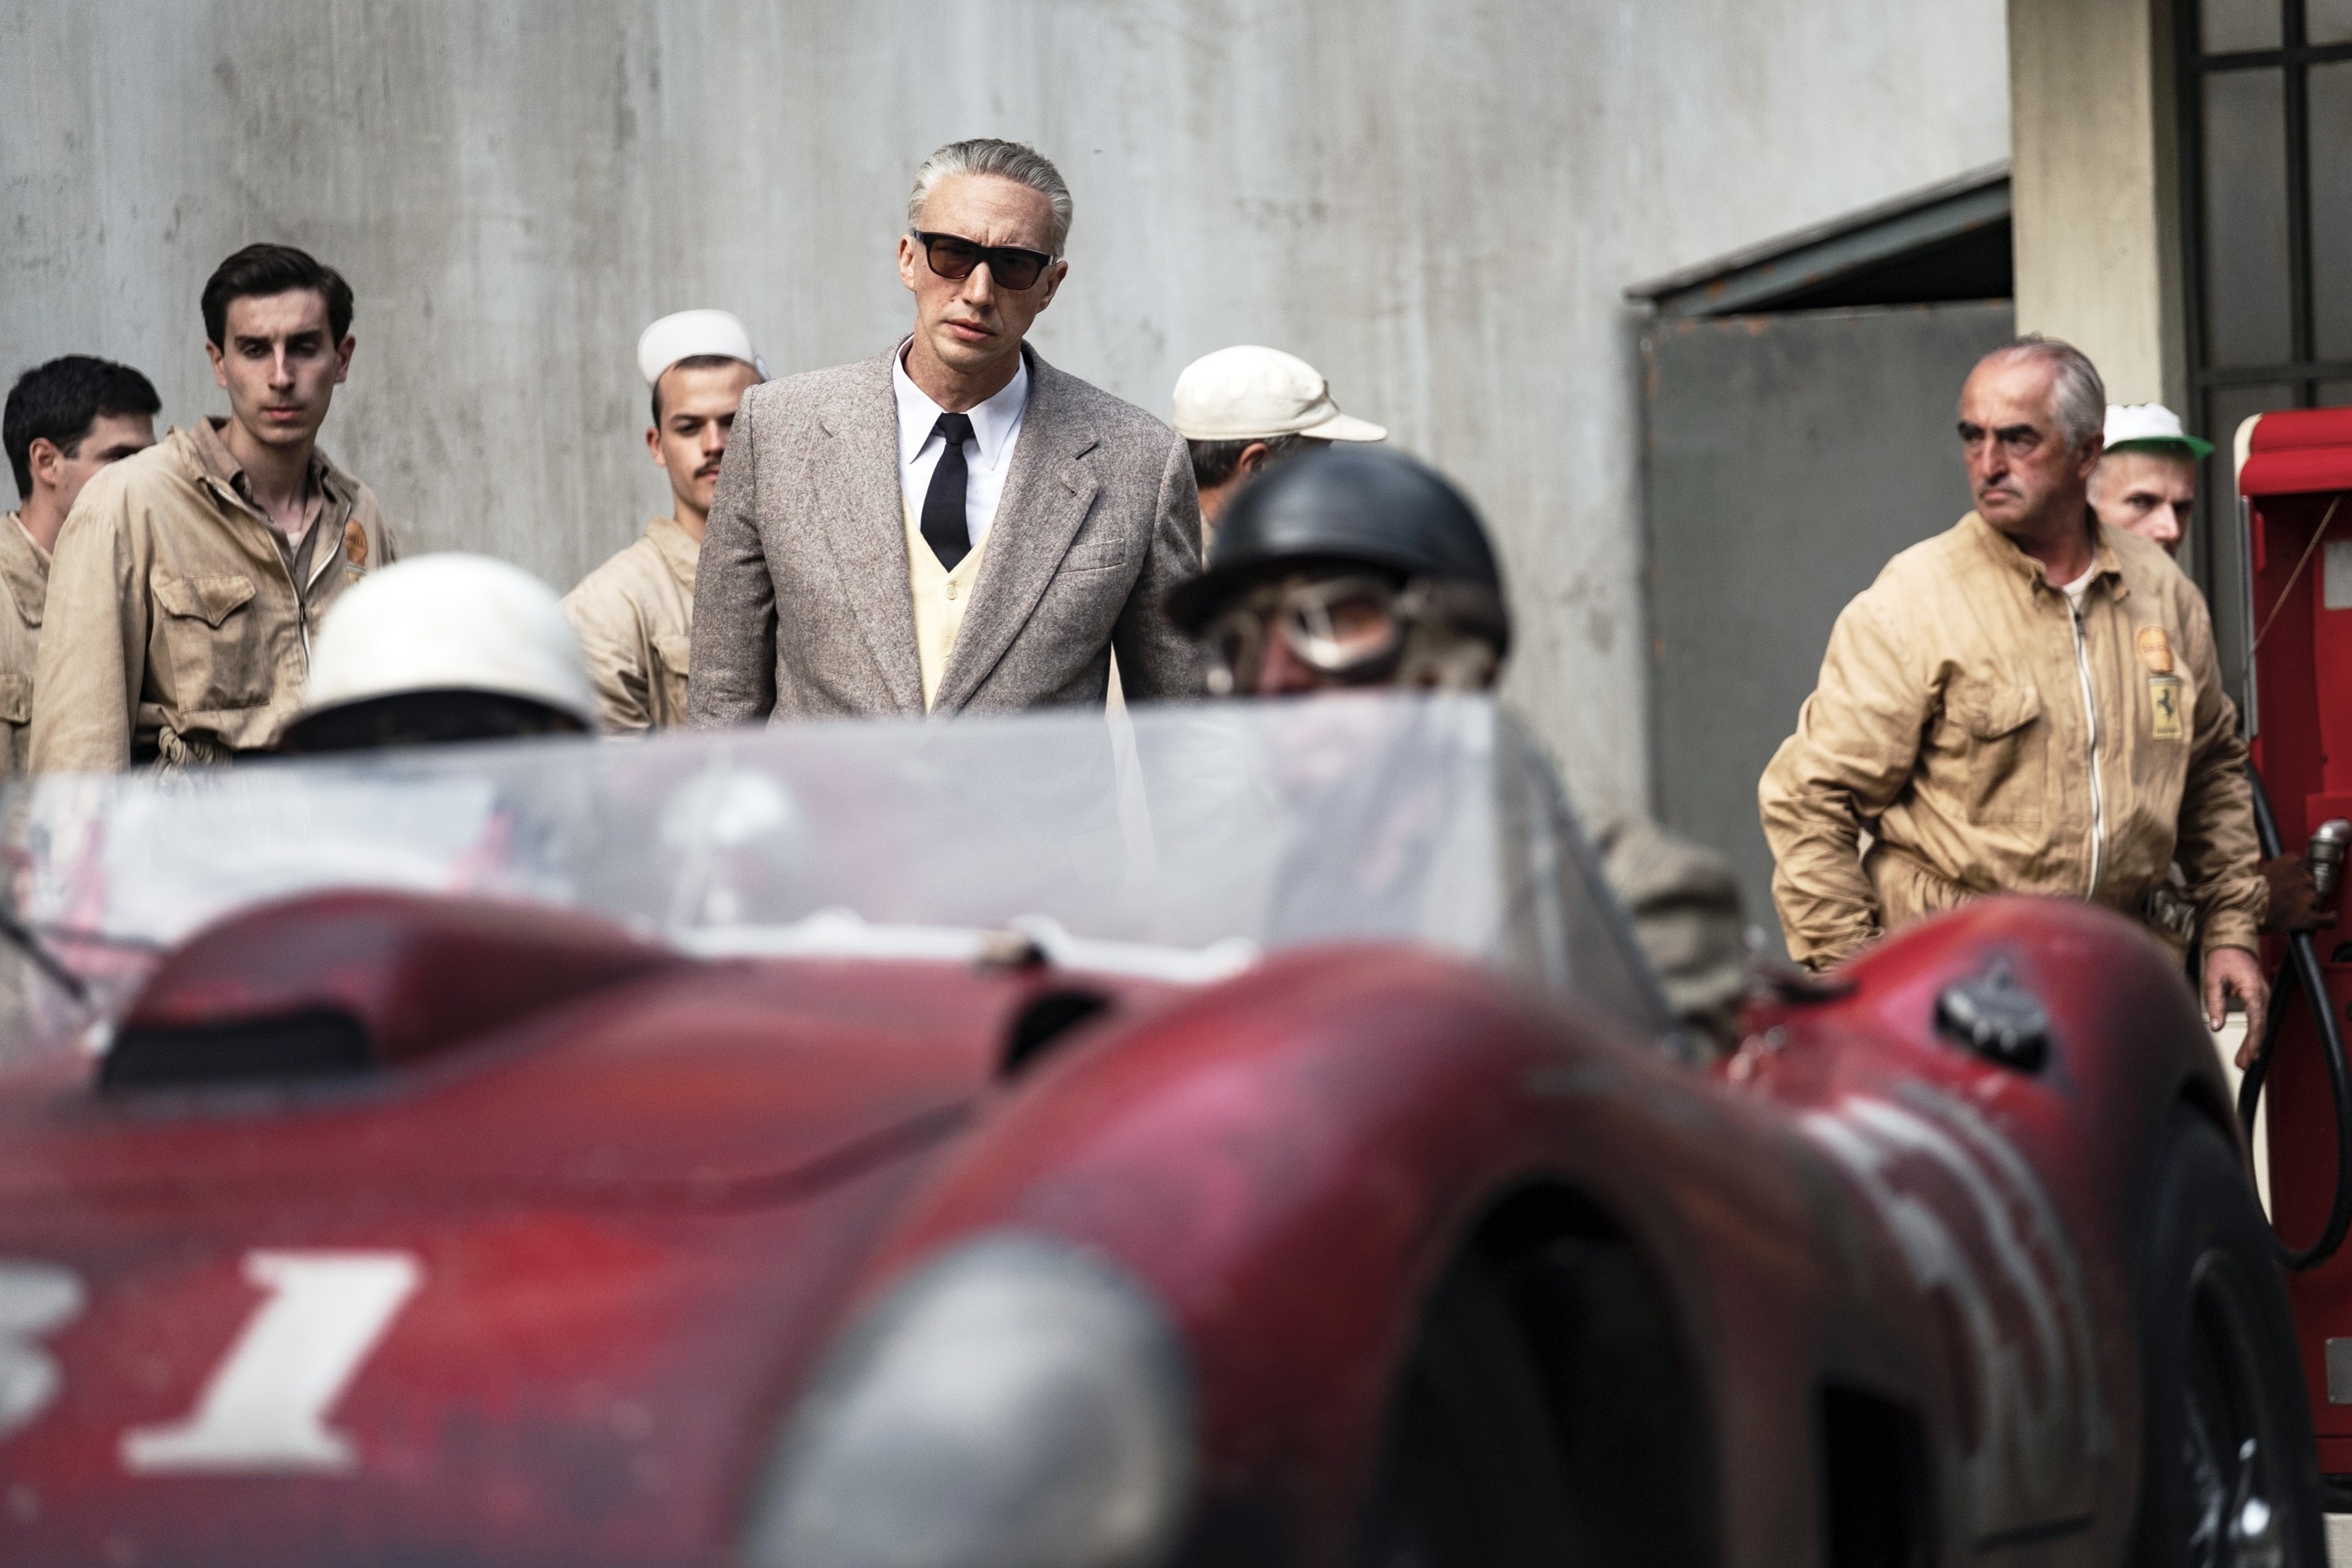 Enzo Ferrari in 1950s attire stands confidently among vintage race cars and pit crew